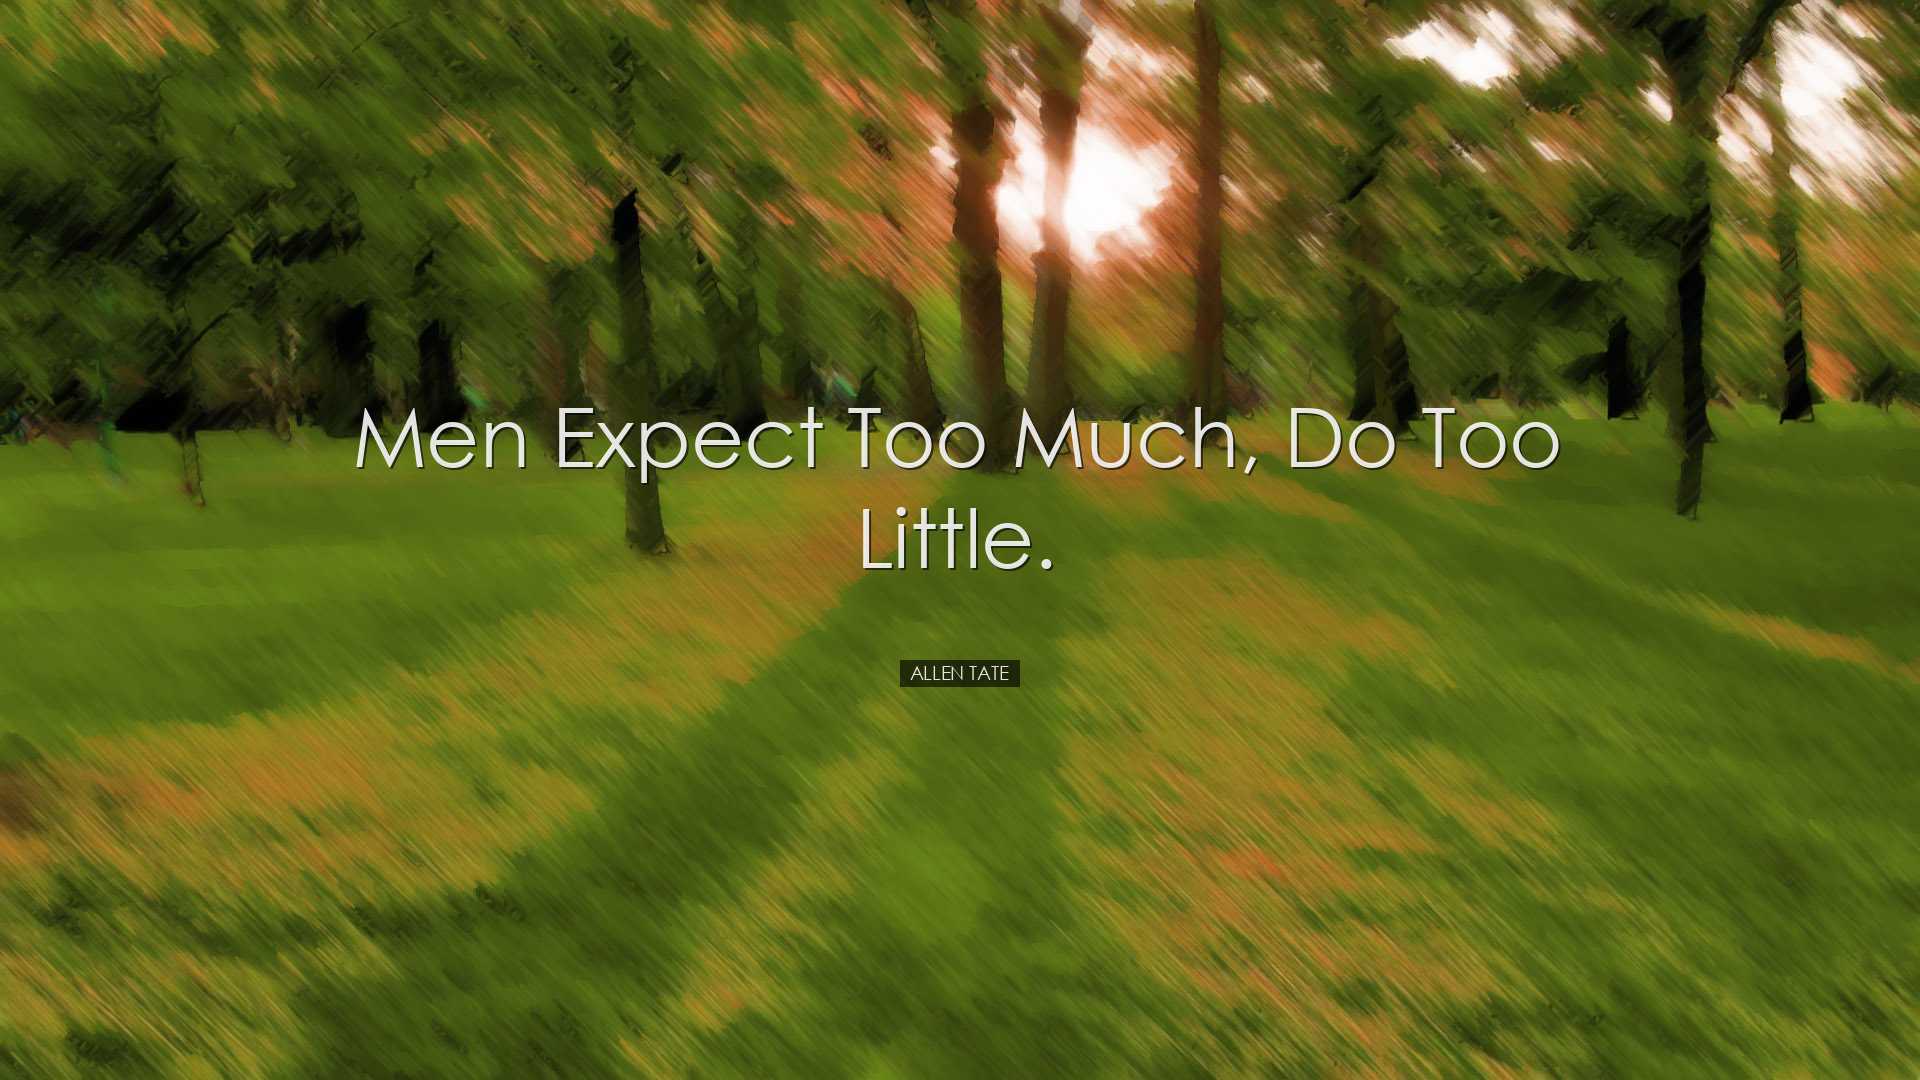 Men expect too much, do too little. - Allen Tate